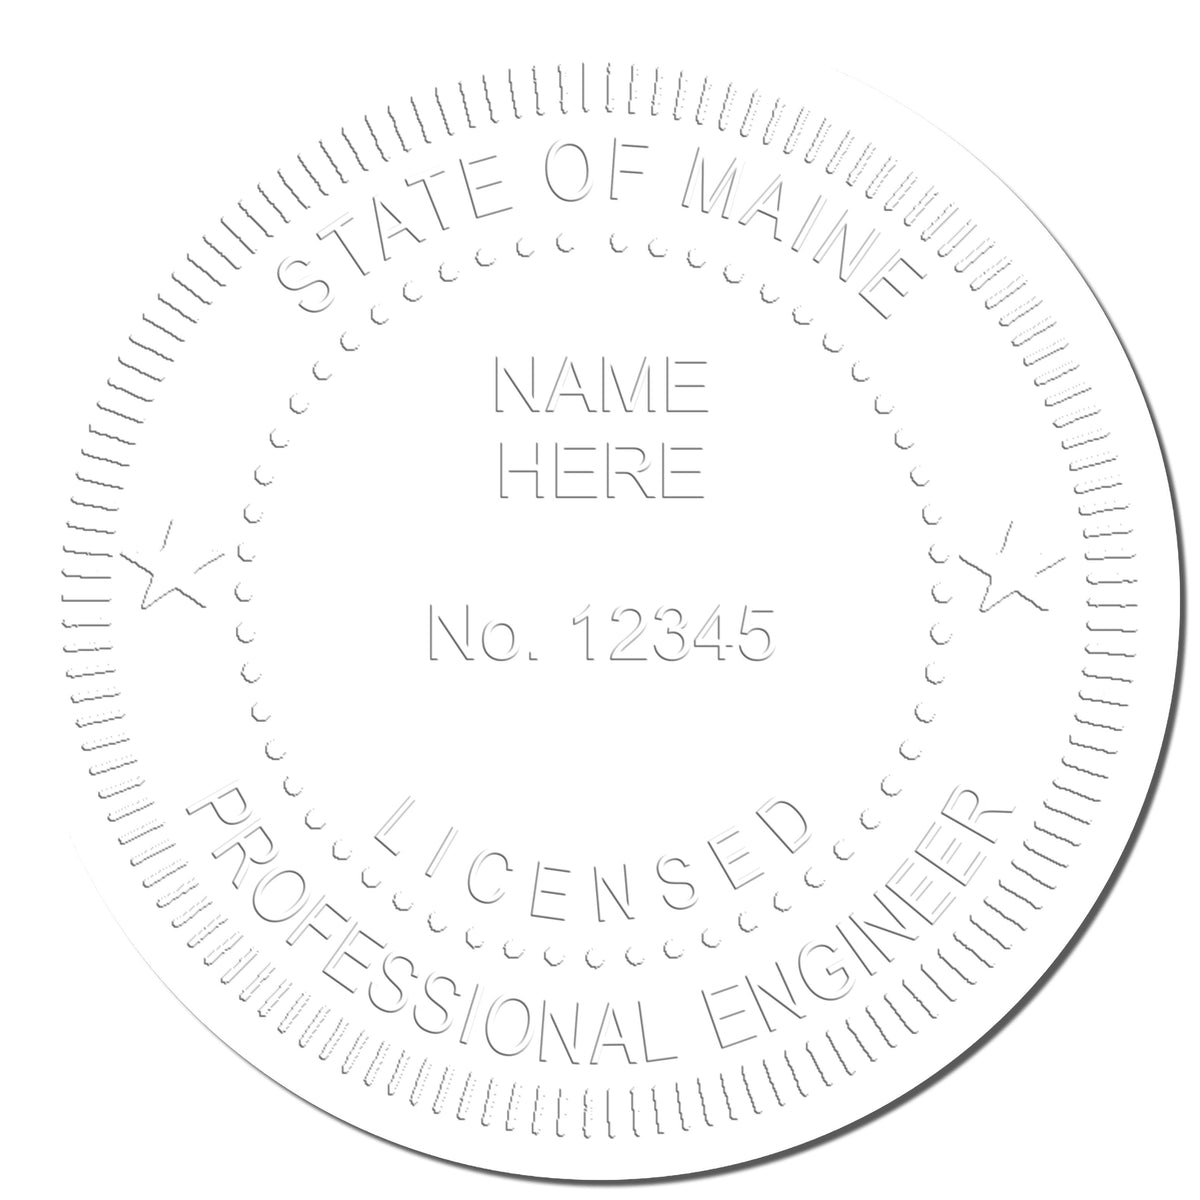 This paper is stamped with a sample imprint of the Heavy Duty Cast Iron Maine Engineer Seal Embosser, signifying its quality and reliability.